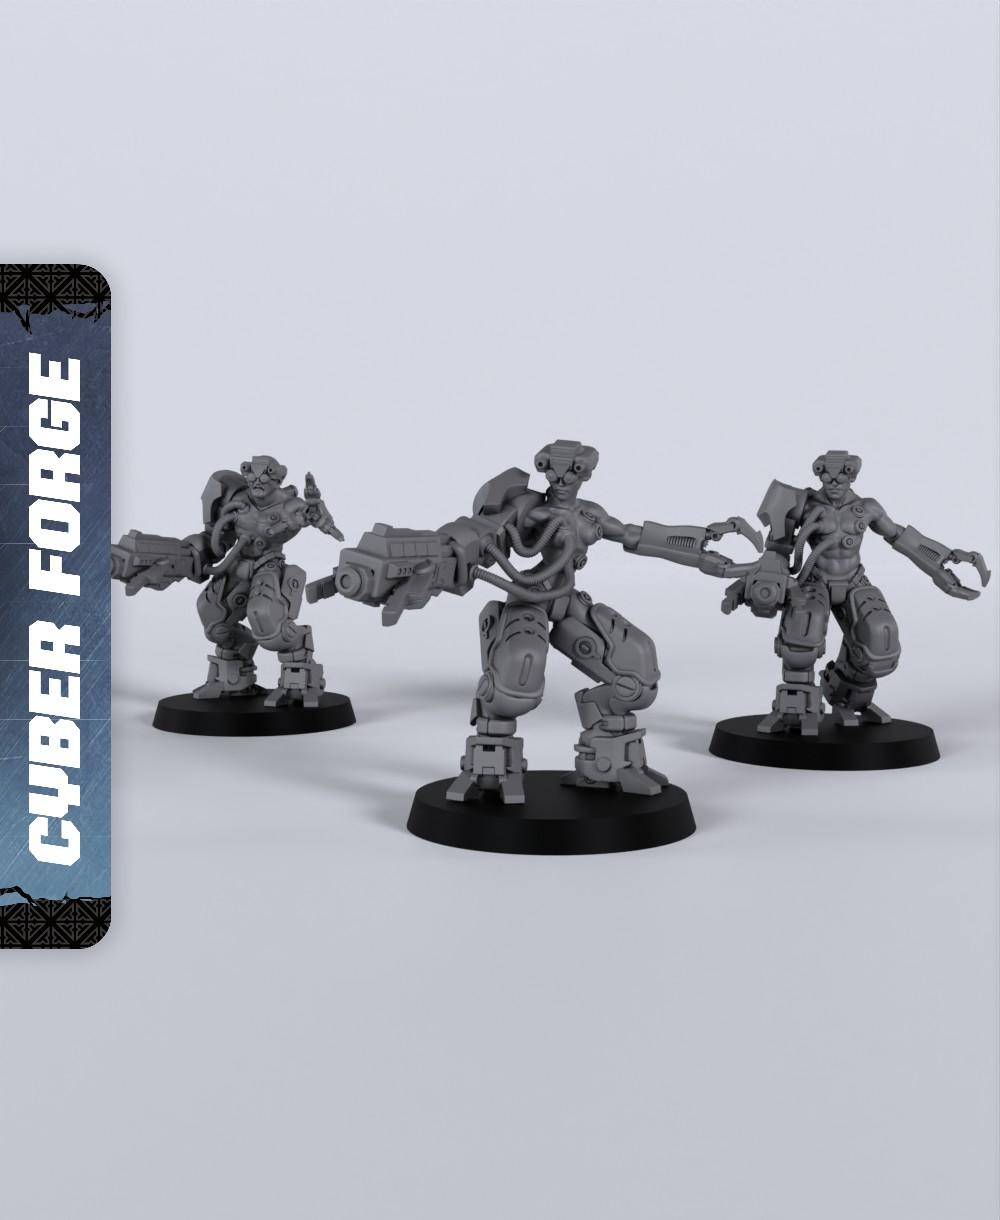 Prime Guards - With Free Cyberpunk Warhammer - 40k Sci-Fi Gift Ideas for RPG and Wargamers 3d model